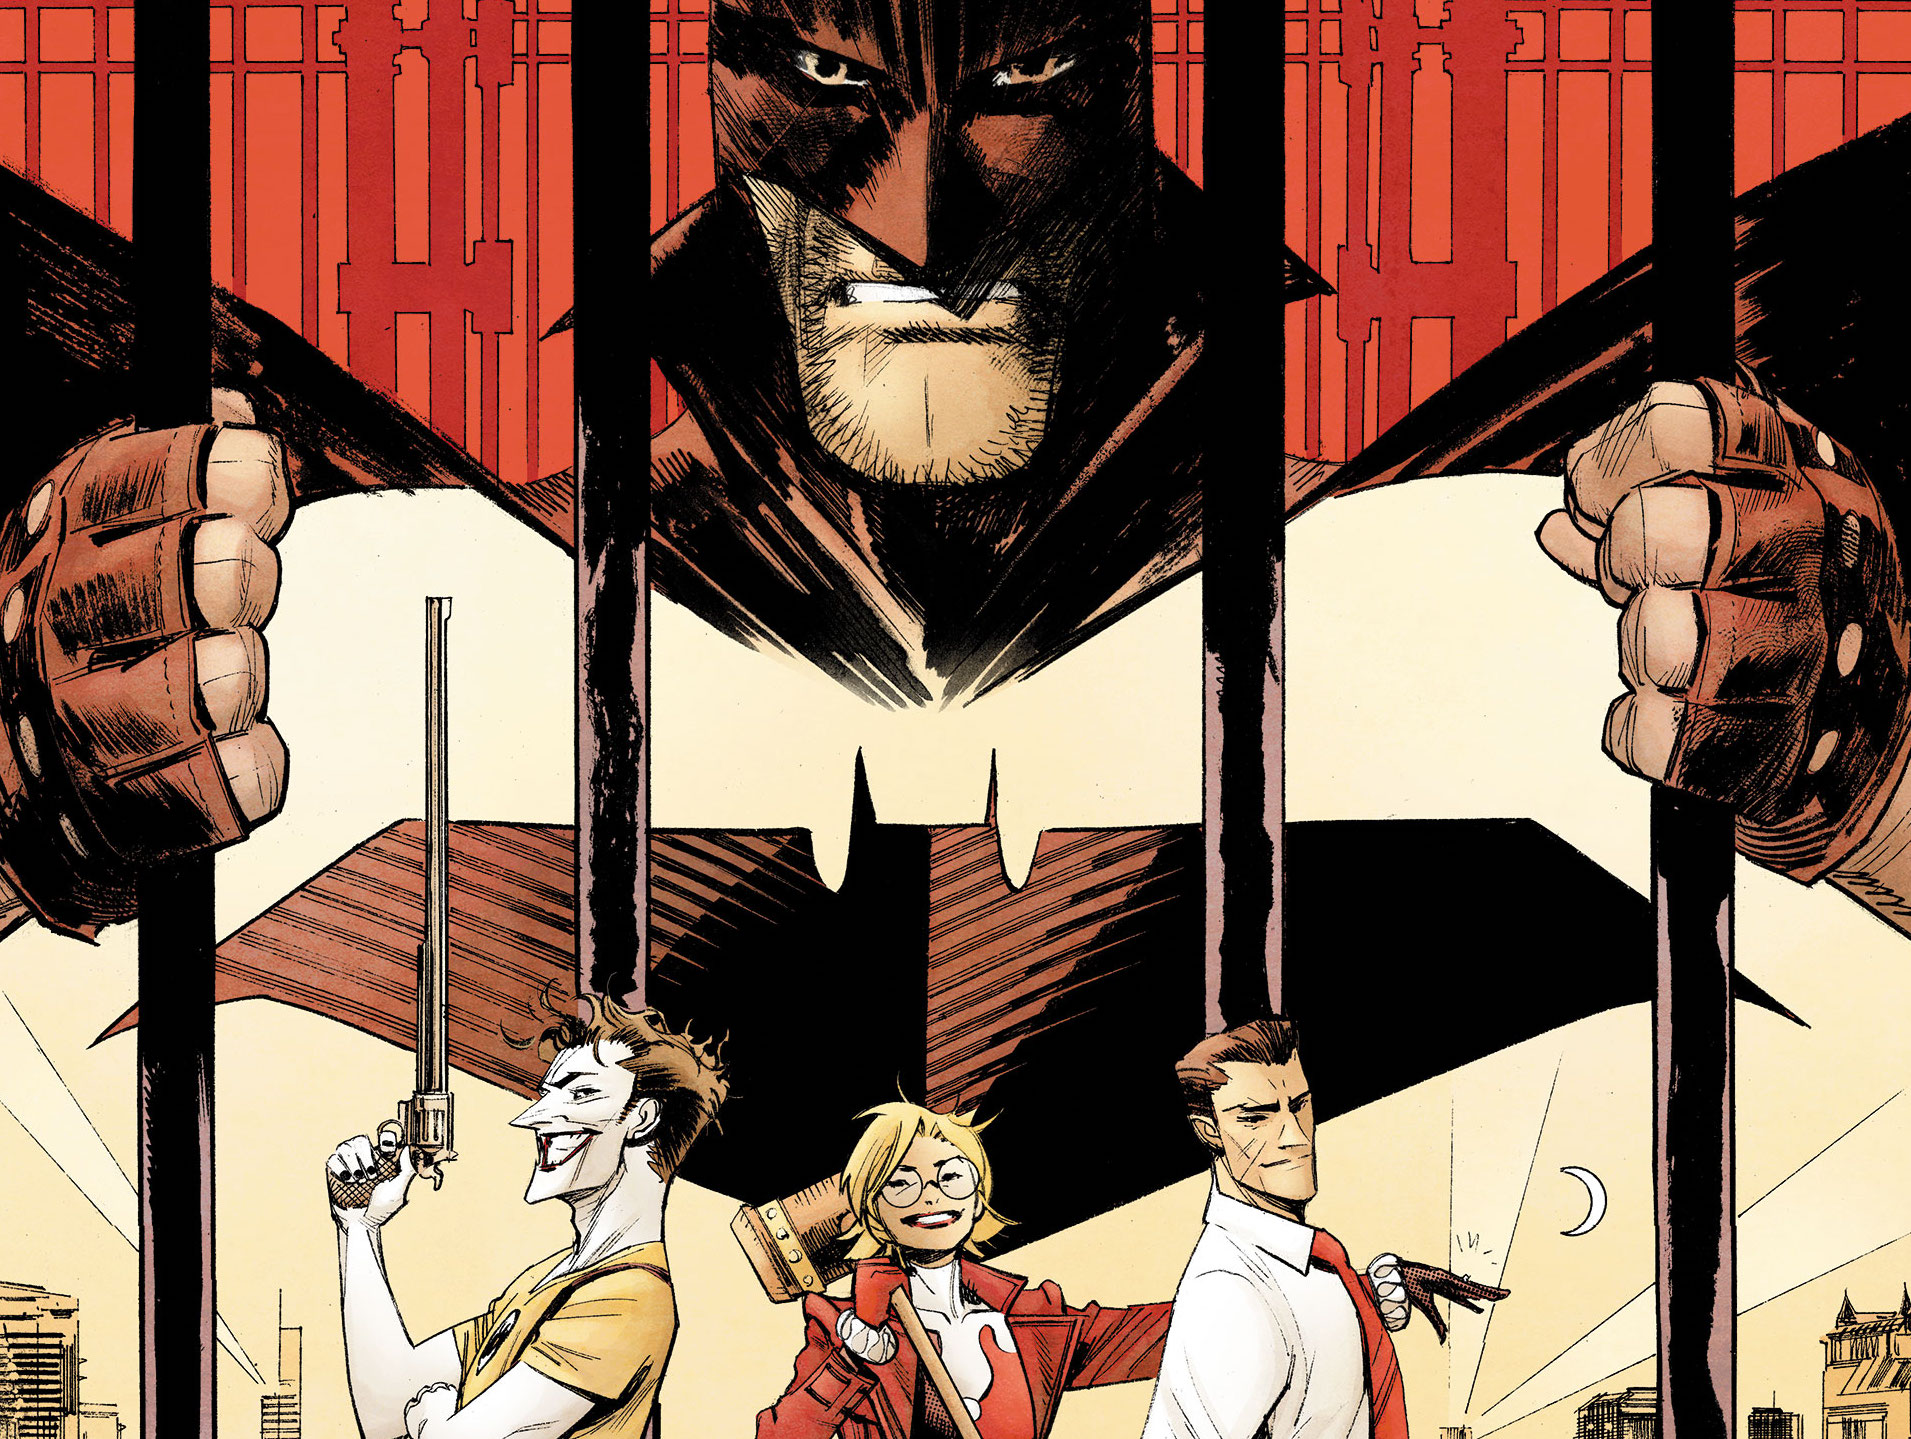 5 reasons you'd be a dope not to buy the Batman: White Knight hardcover